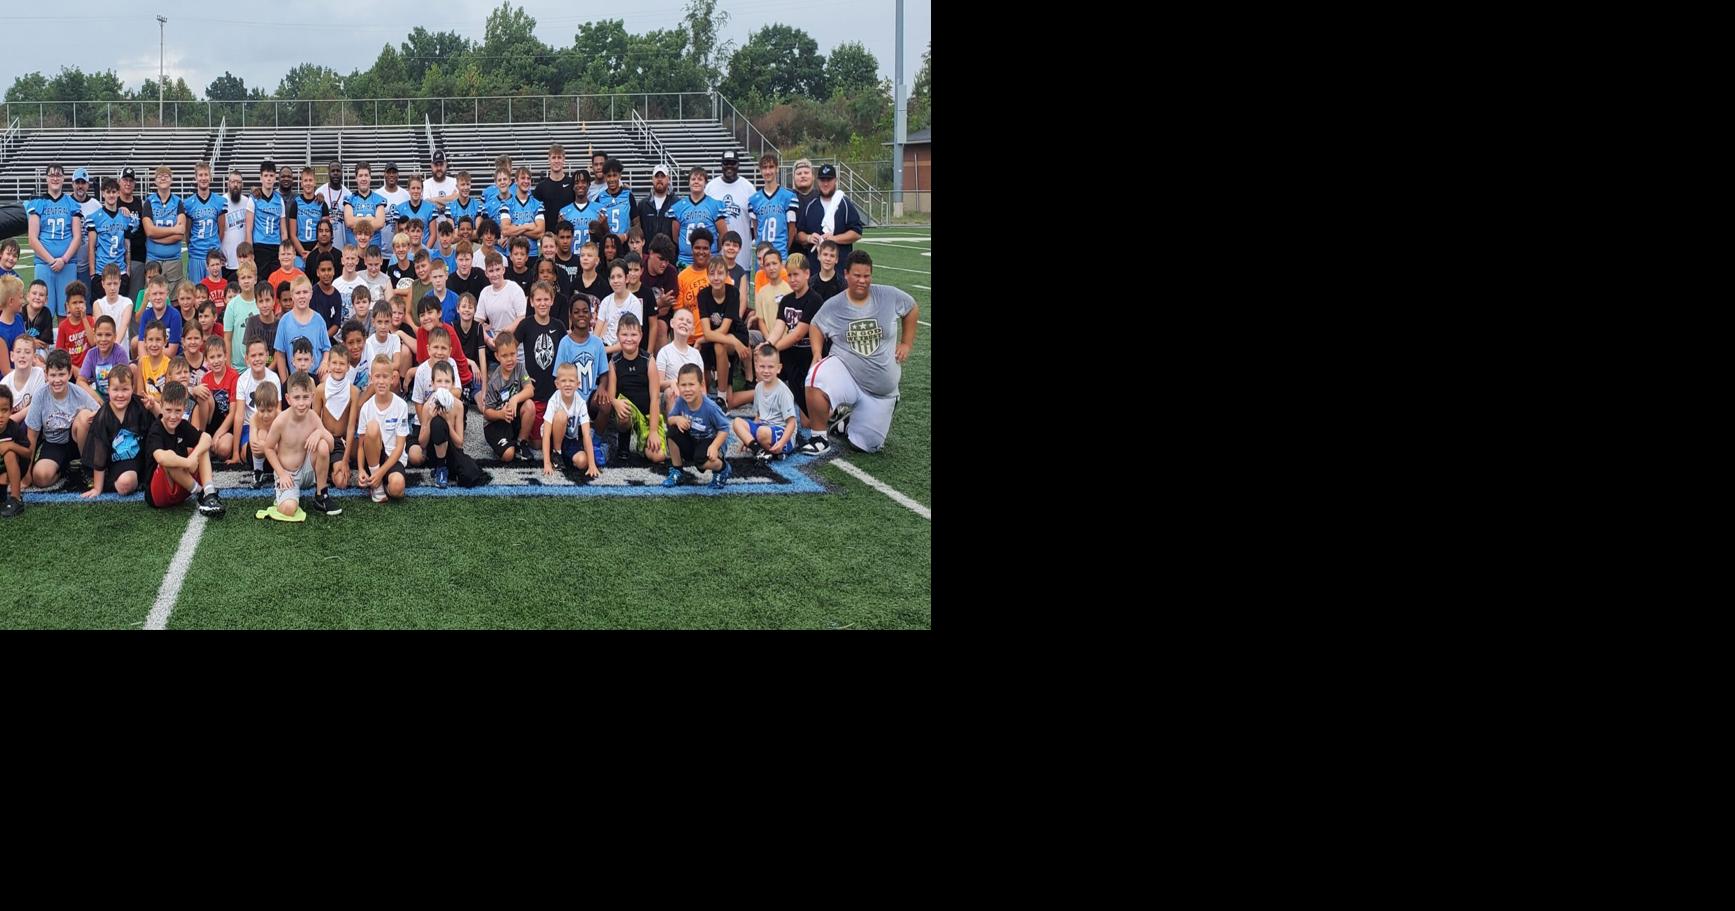 Over 100 turn out for Mingo Central Youth Football Camp